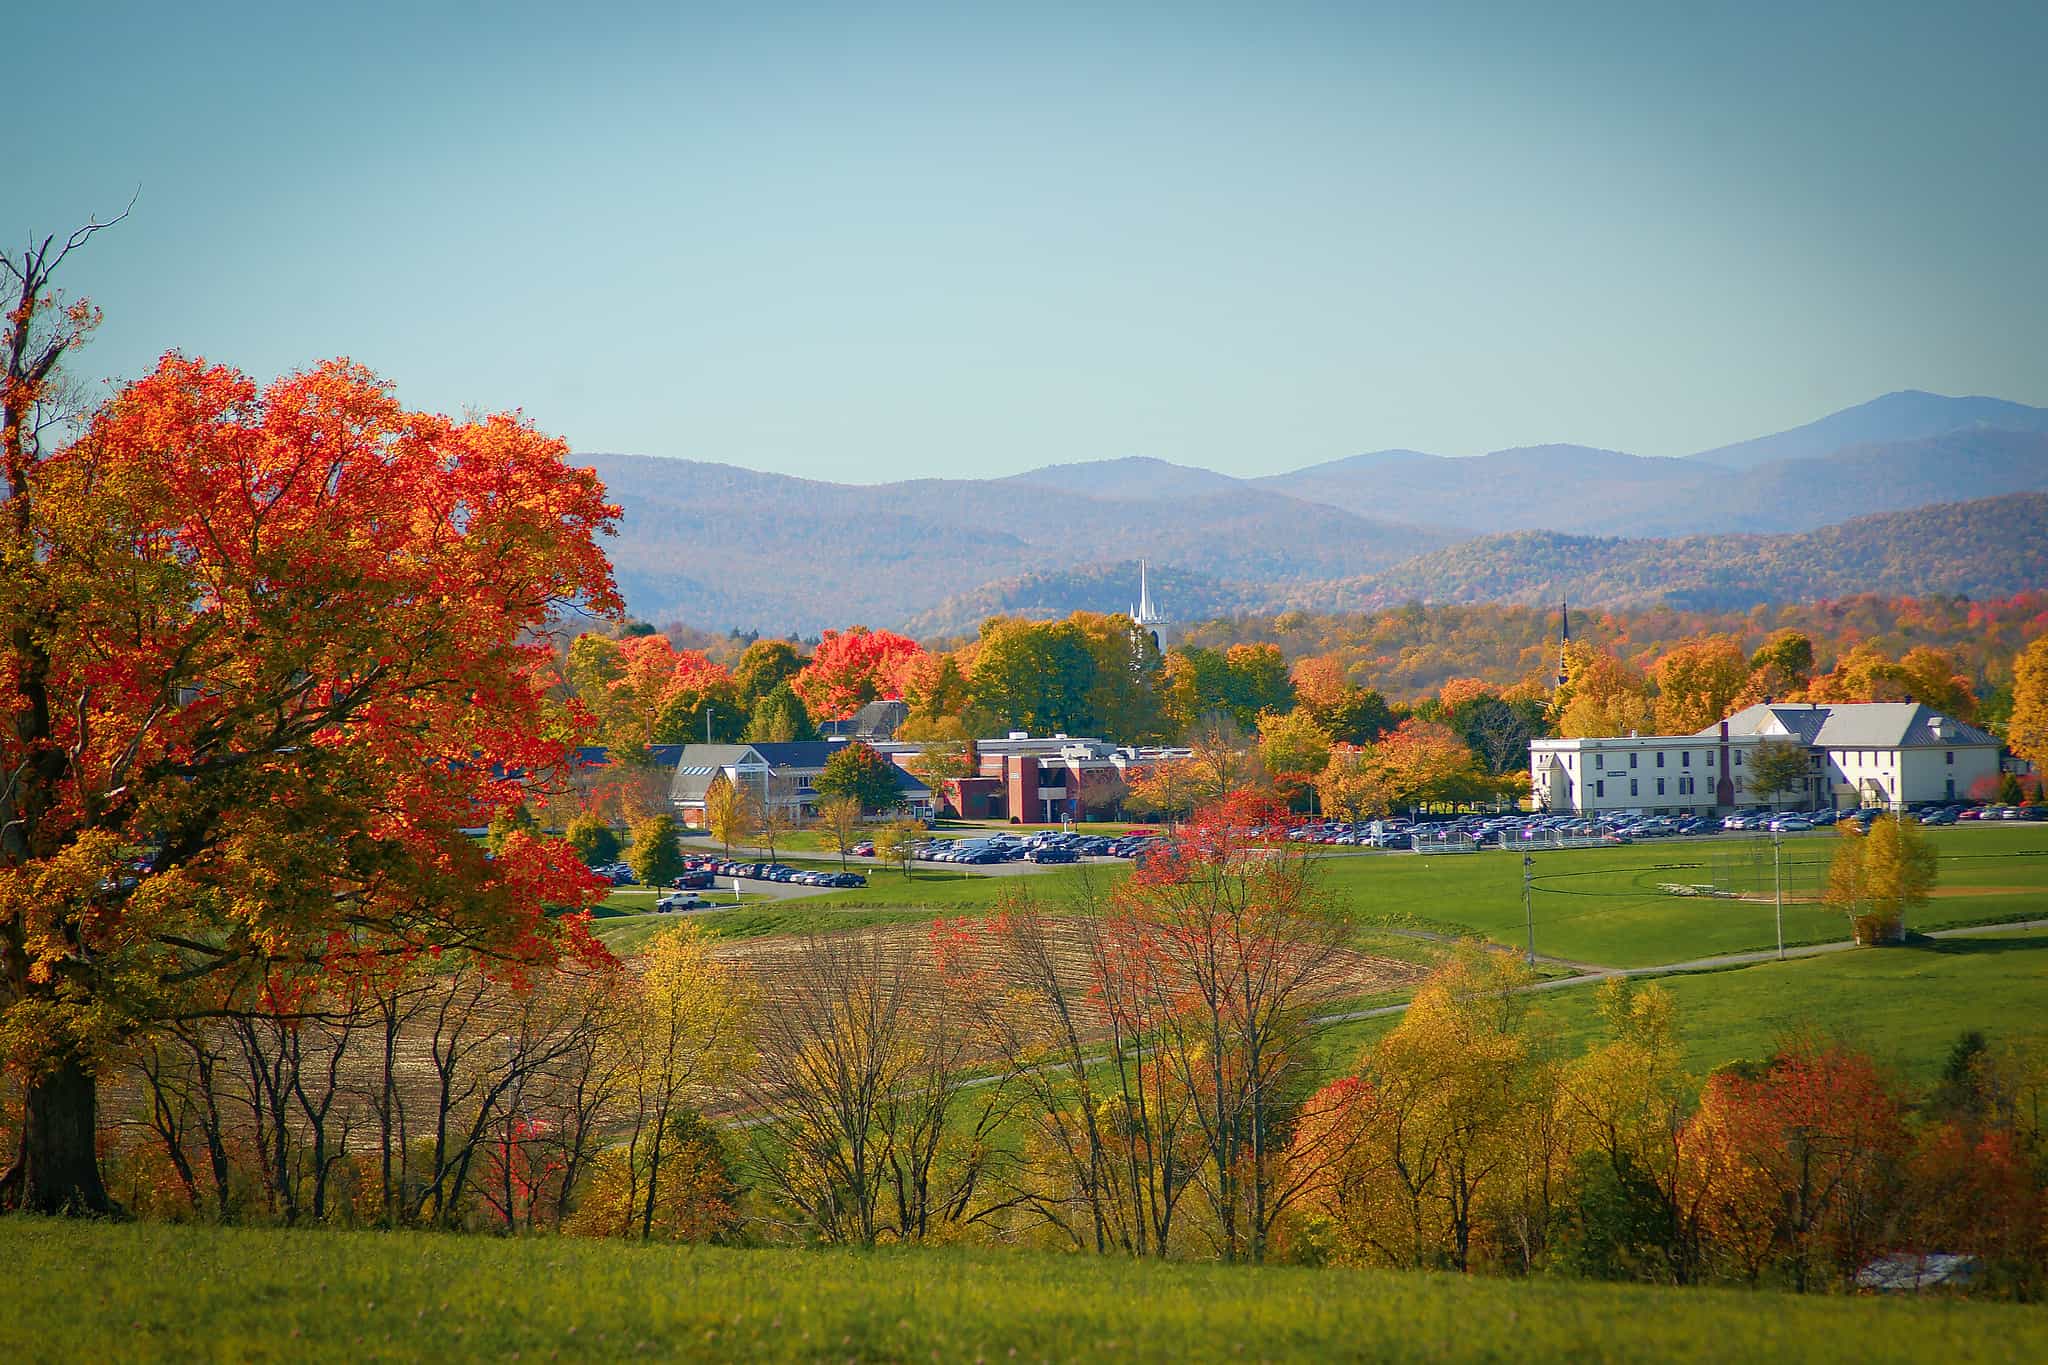 A scenic fall photo overlooking a cluster of buildings, mountains and farmlands.